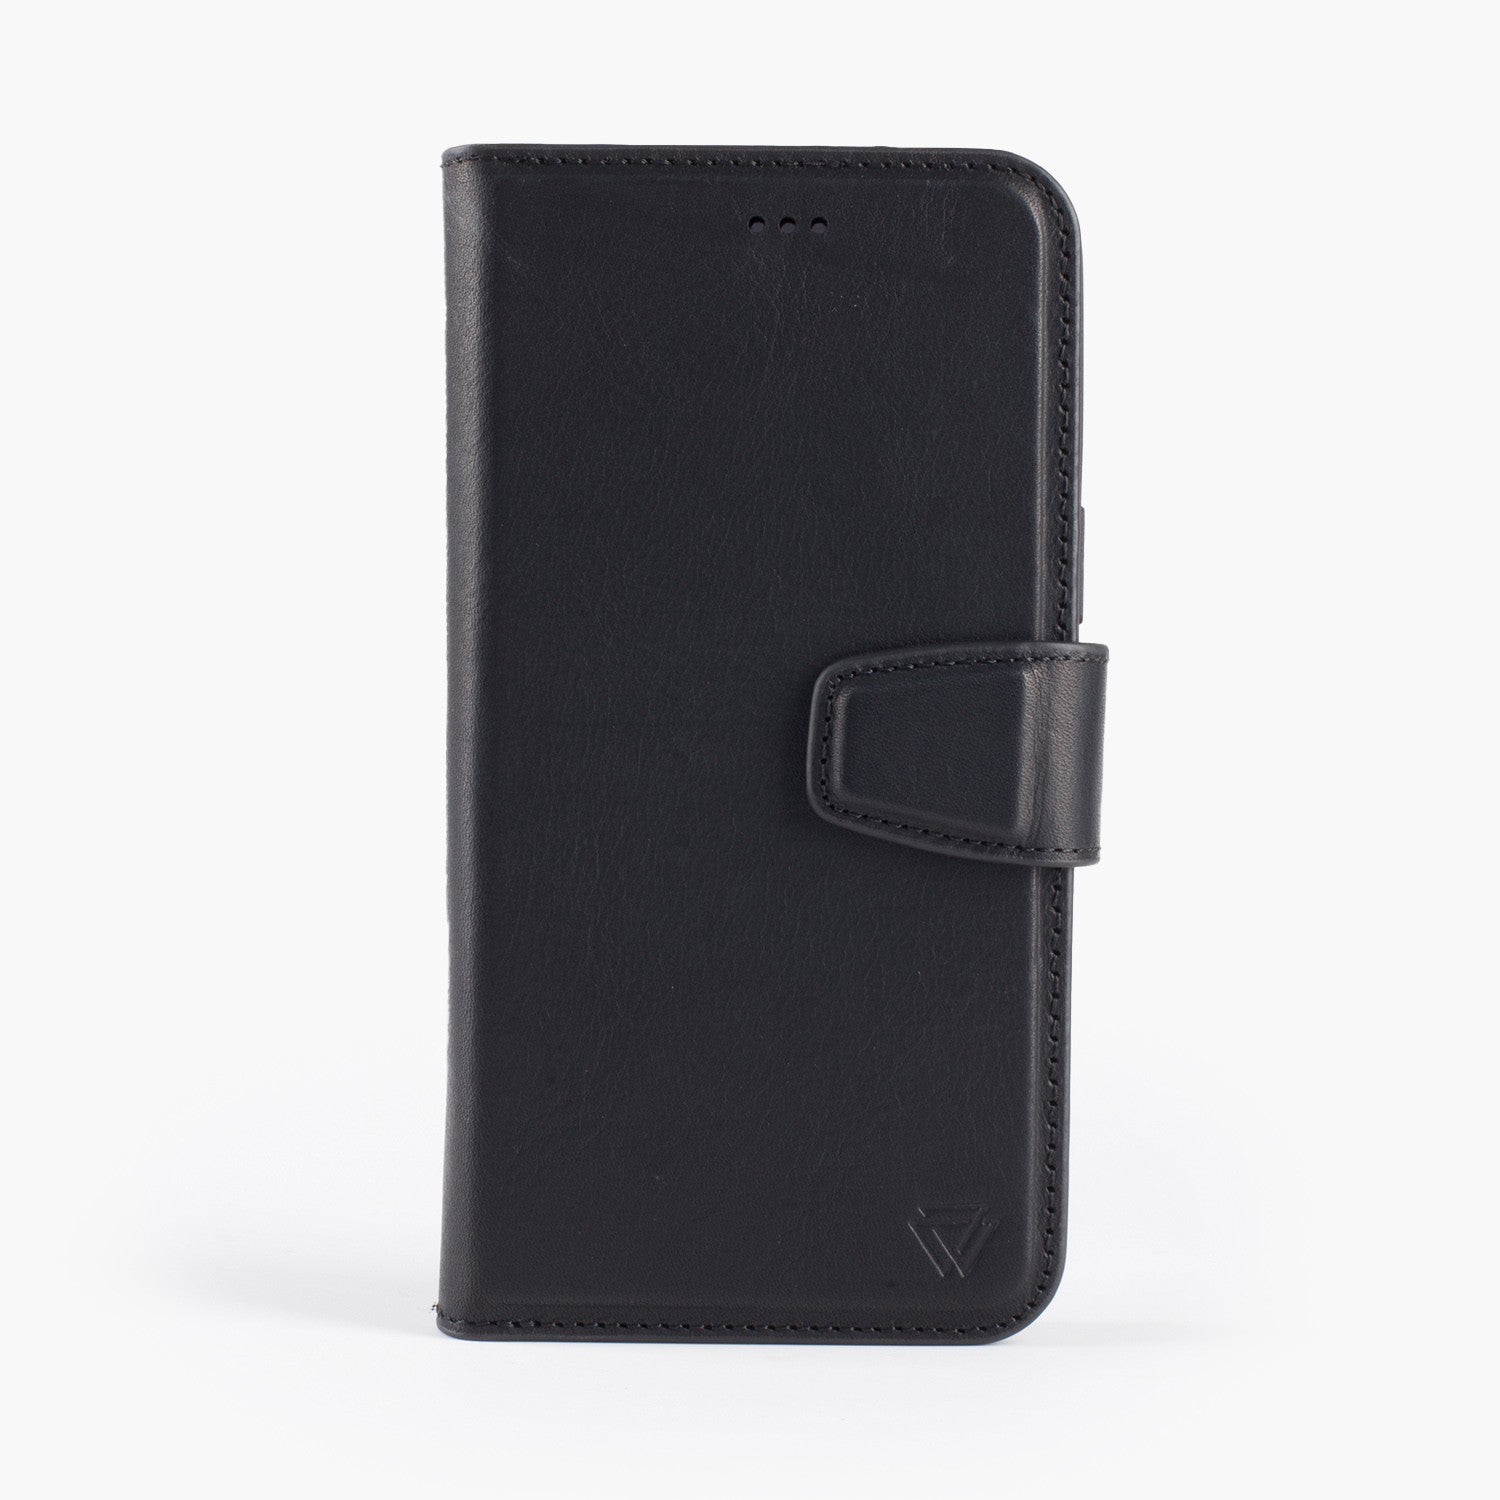 Wachikopa leather Magic Book Case 2 in 1 for iPhone 11 Pro Black